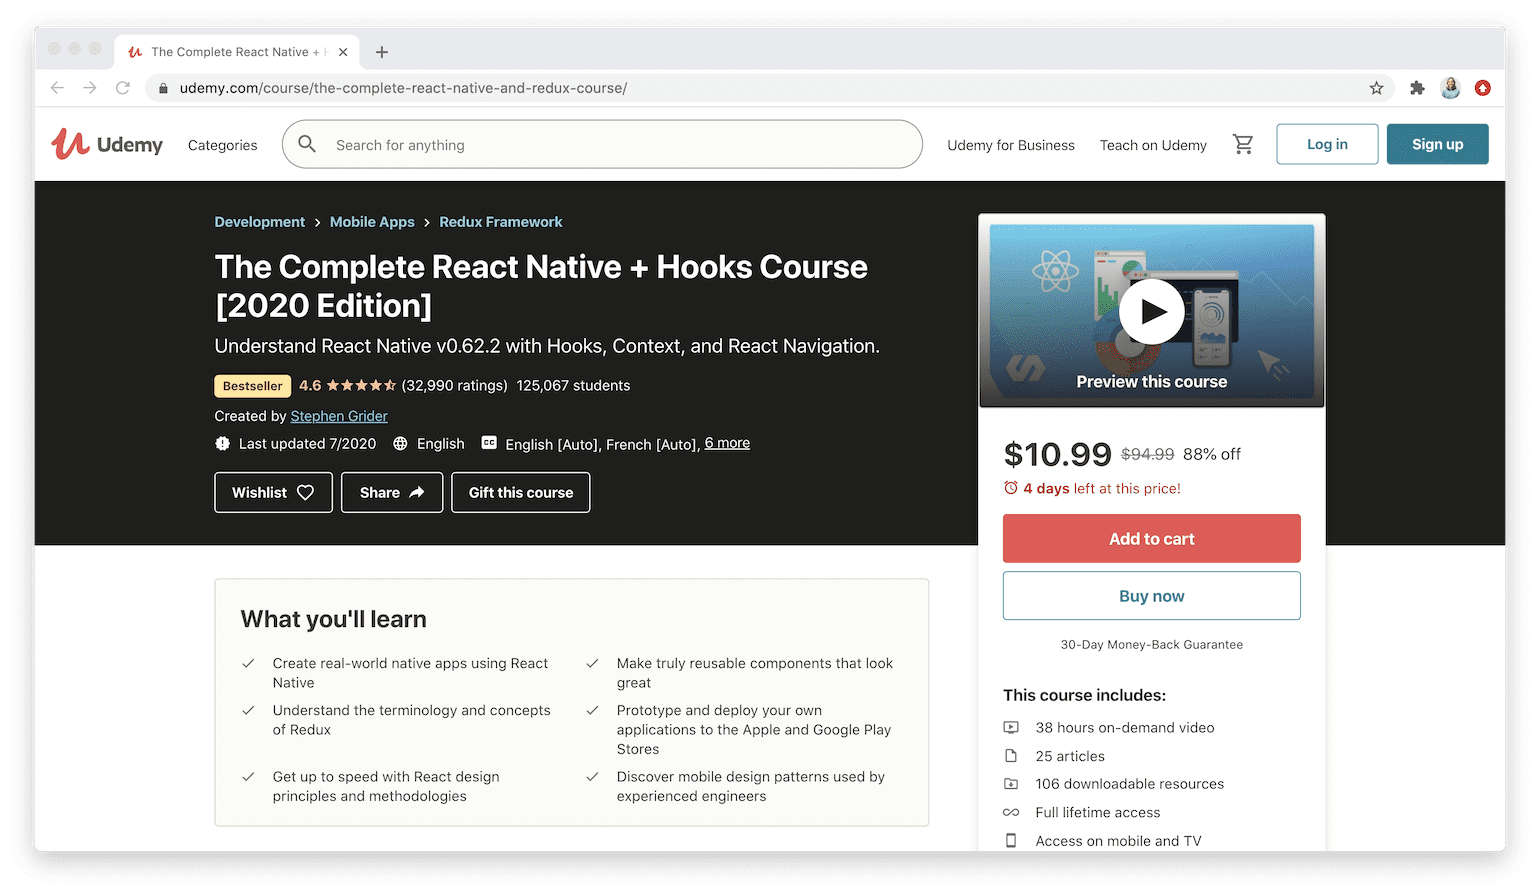 The Complete React Native Hooks Course